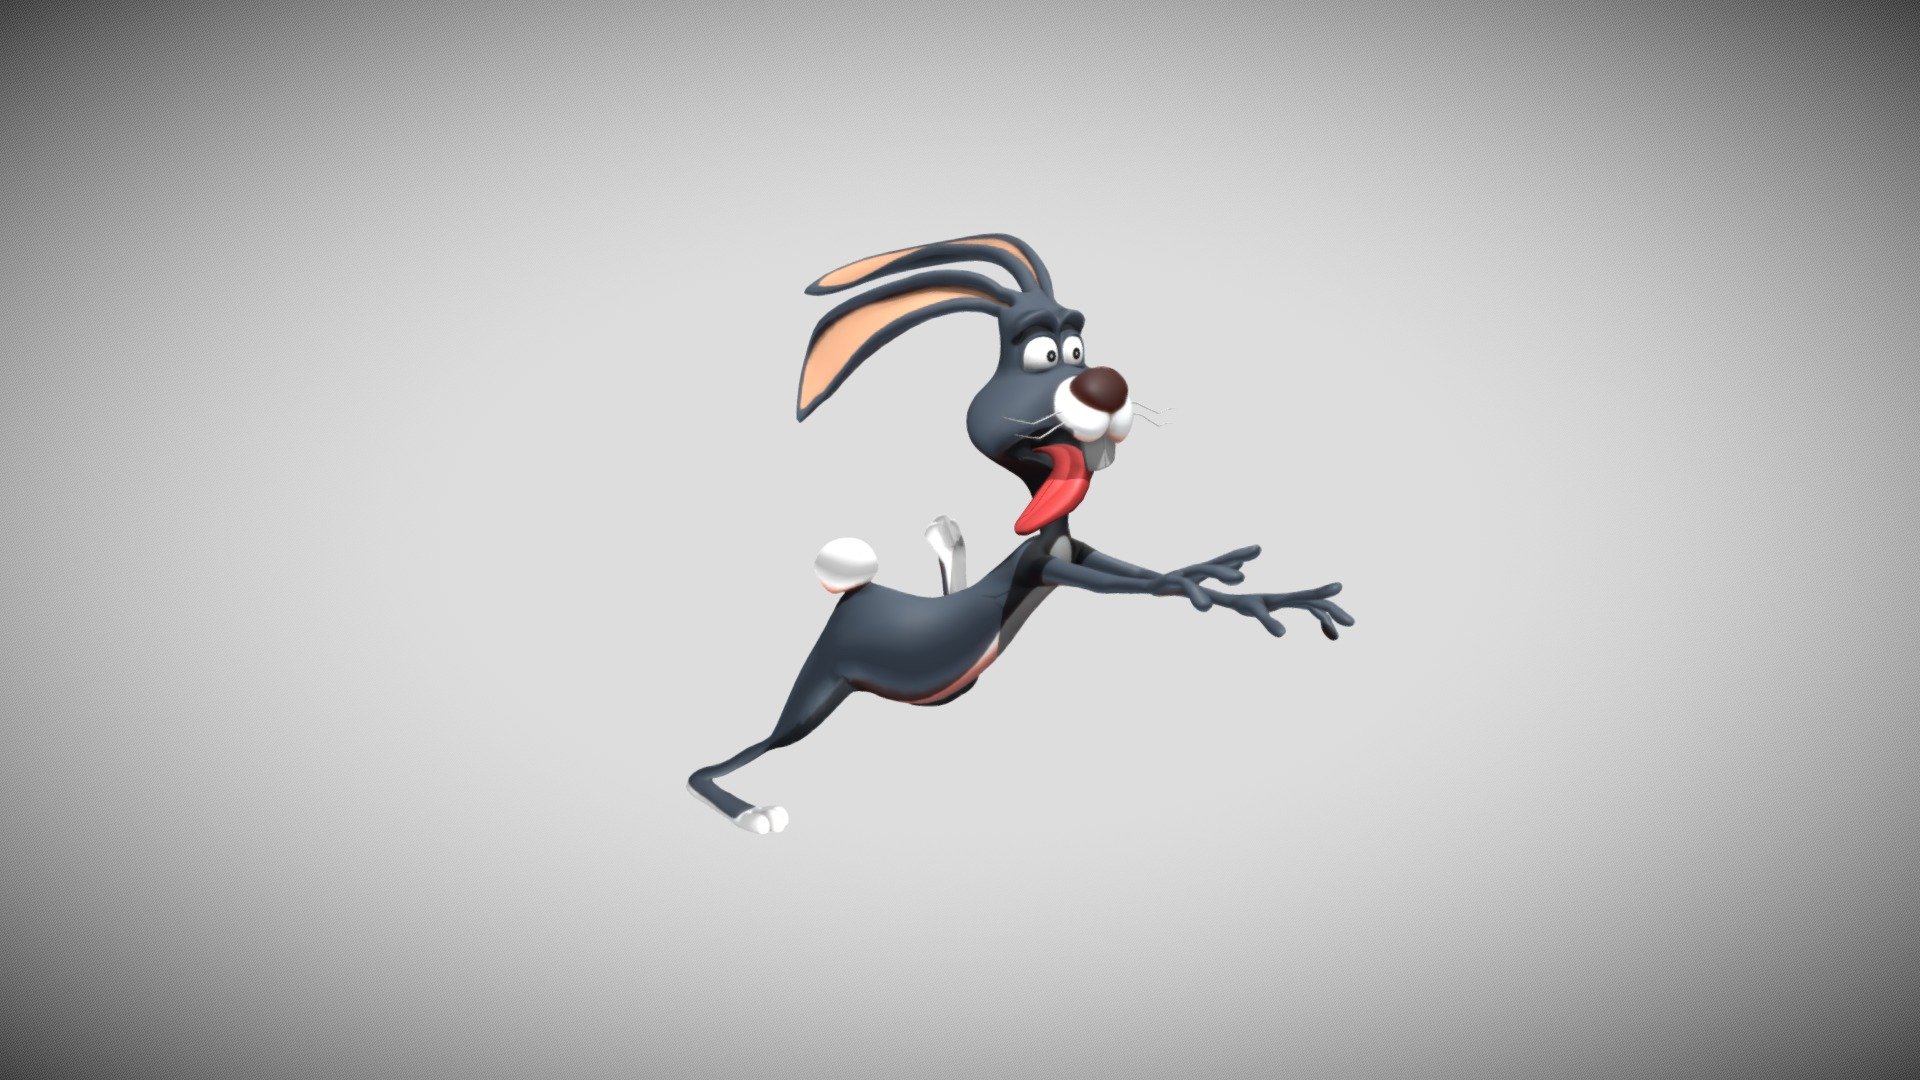 Made this animation for Fun - Hare Fast Run - 3D model by Madushan 3d model